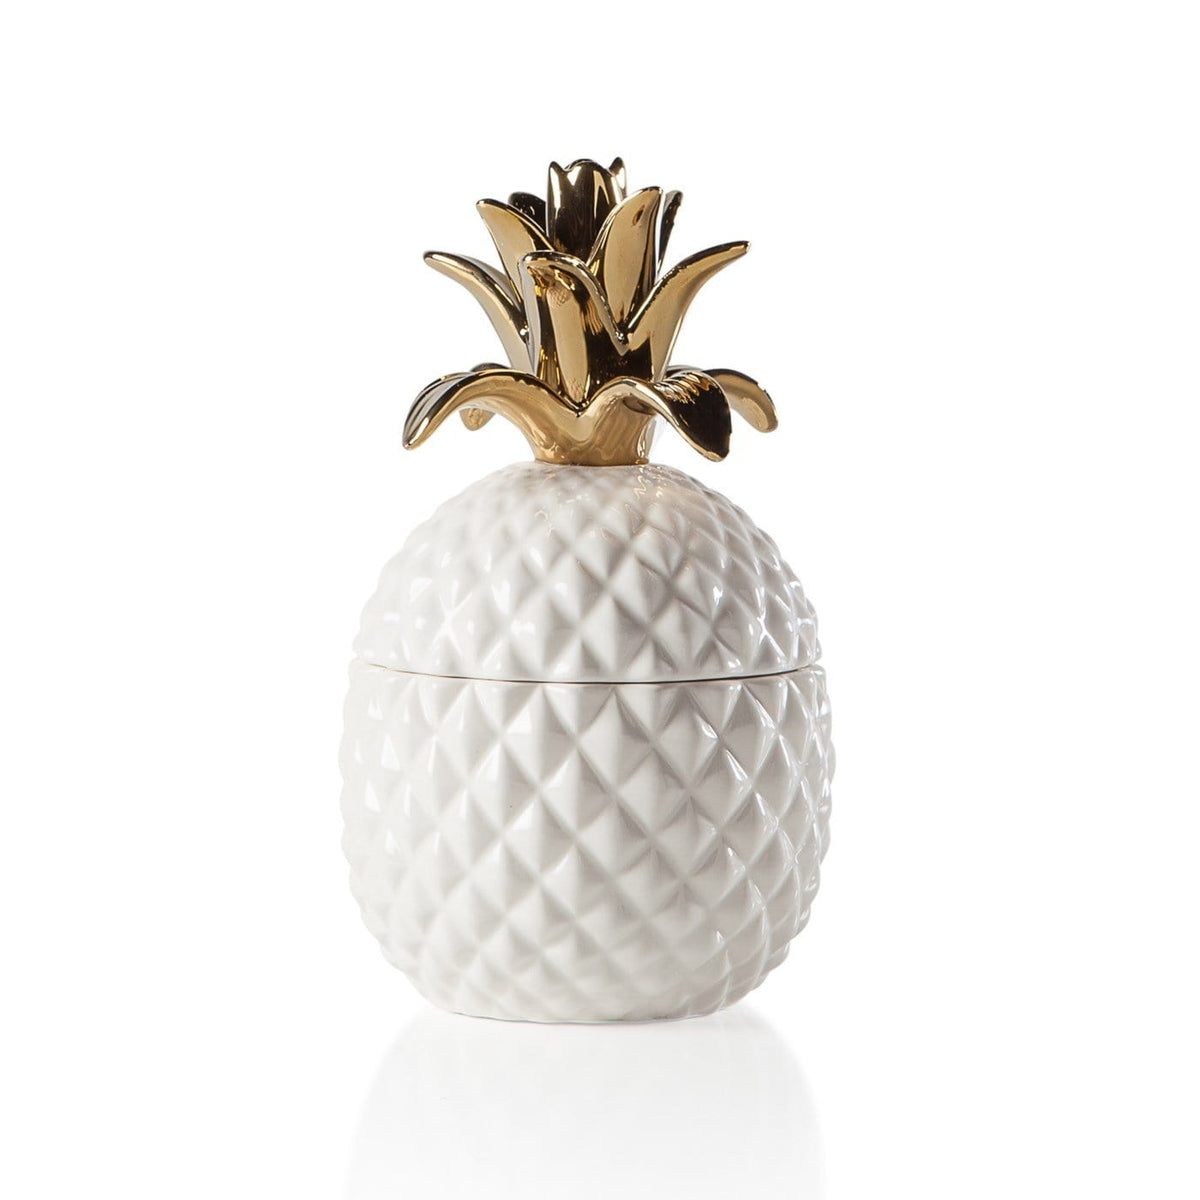 Pineapple Gold Crown White Ceramic Canister (2 Sizes)